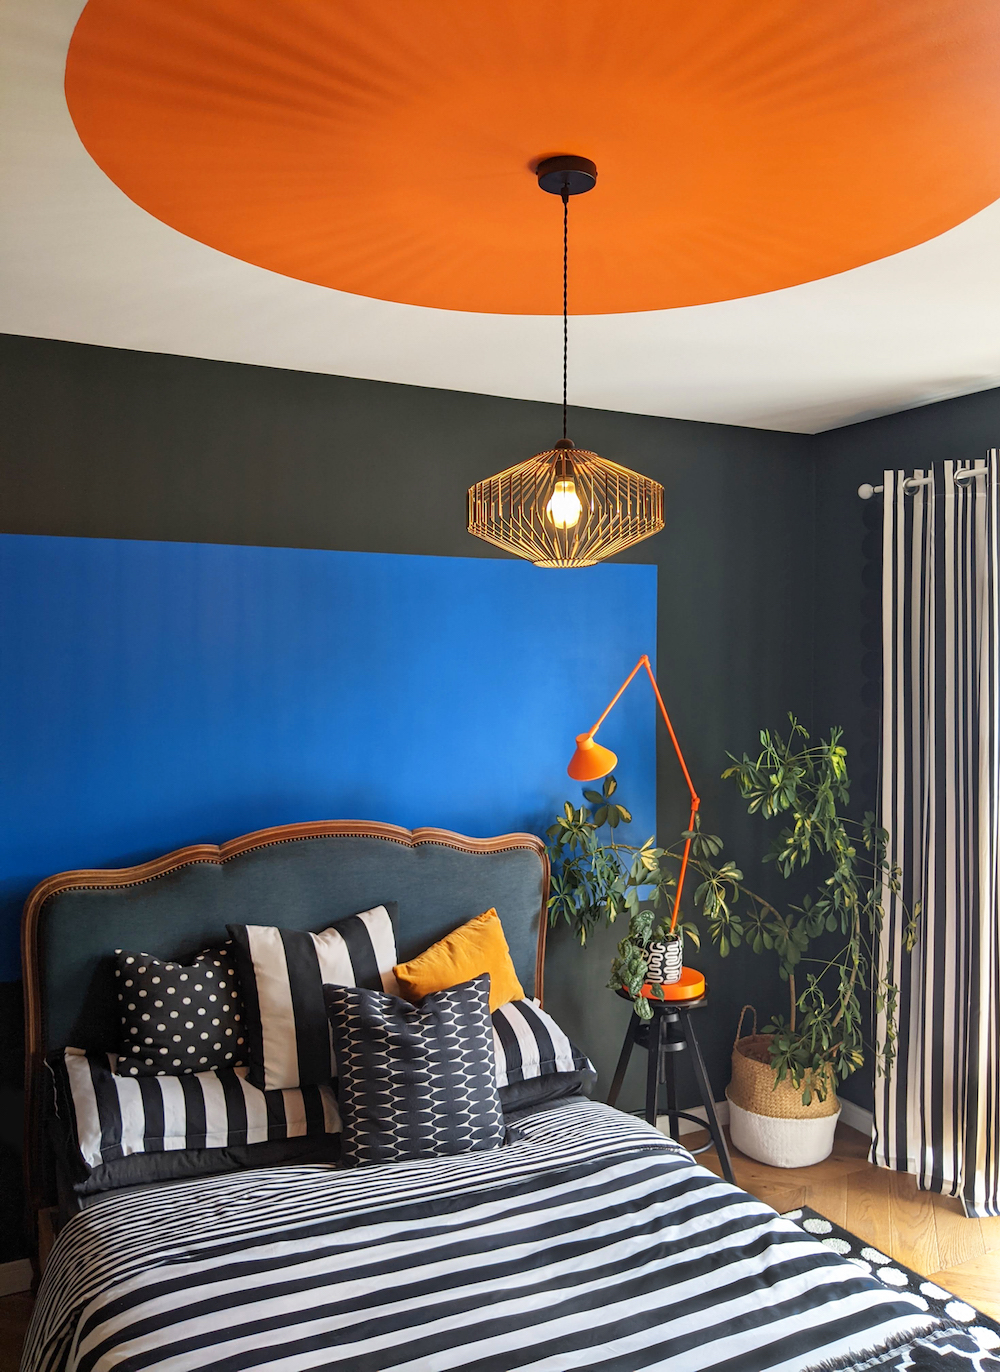 A painted orange circle on the ceiling as a paint treatment